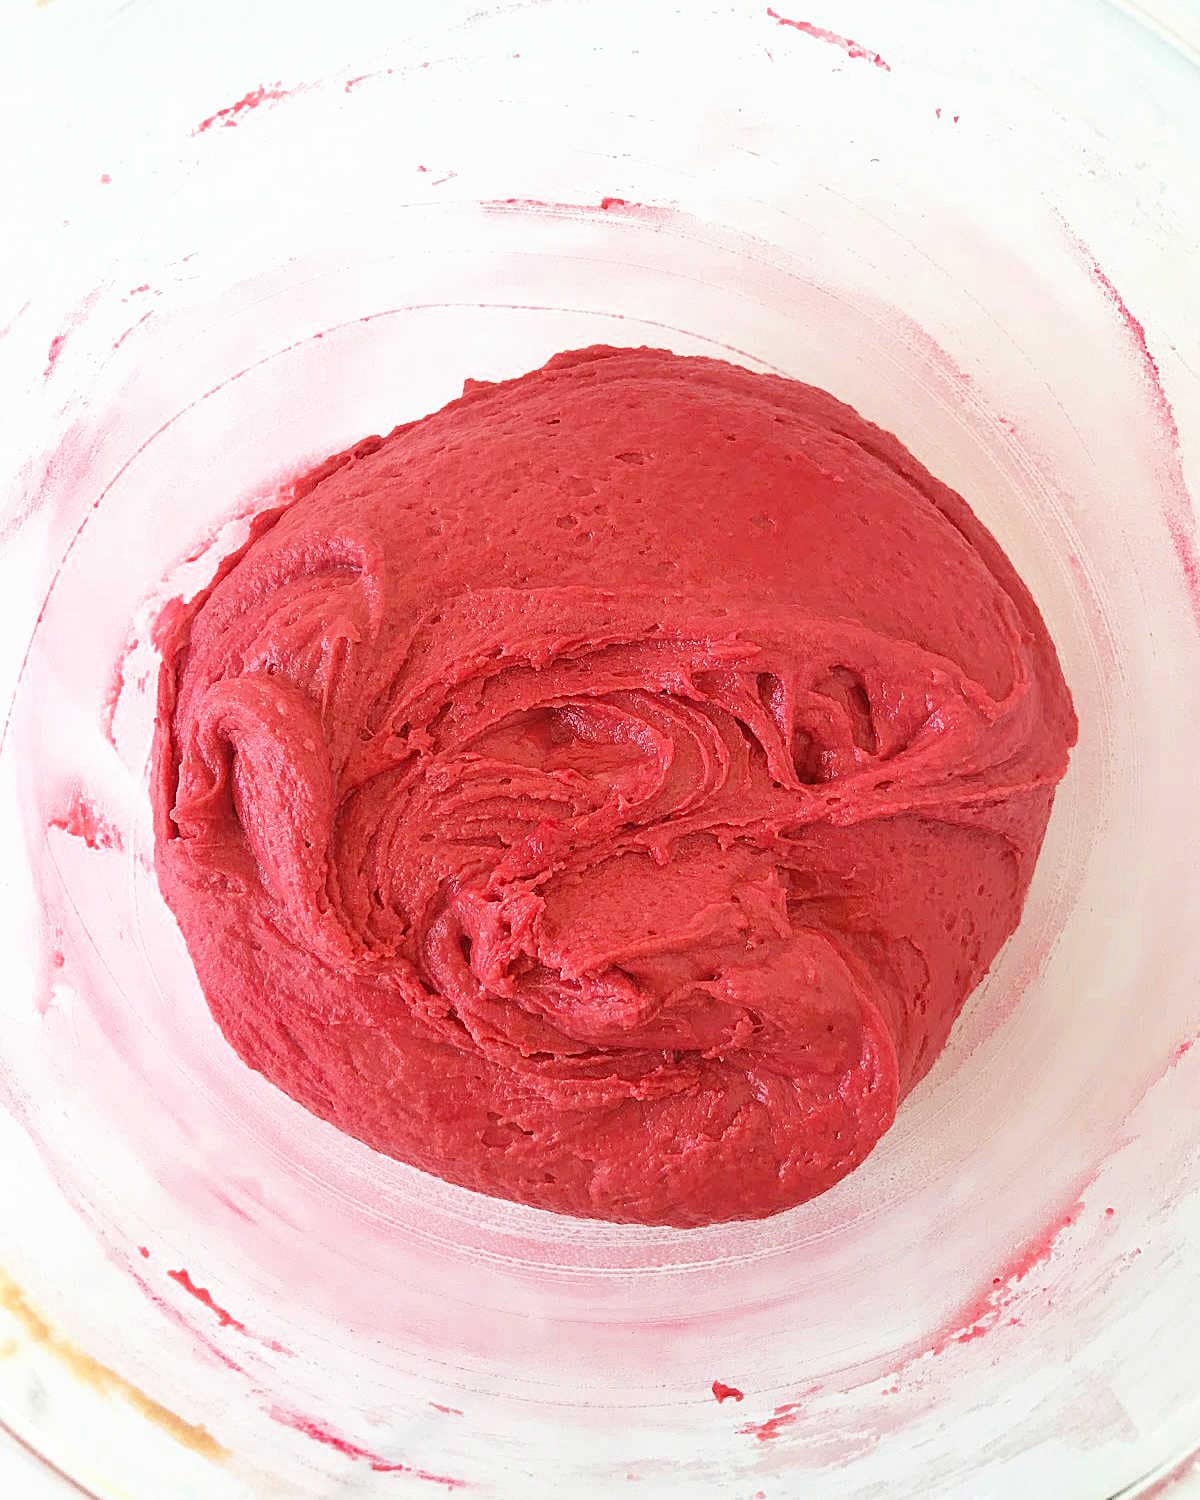 Red-colored batter in a glass bowl on a white surface.